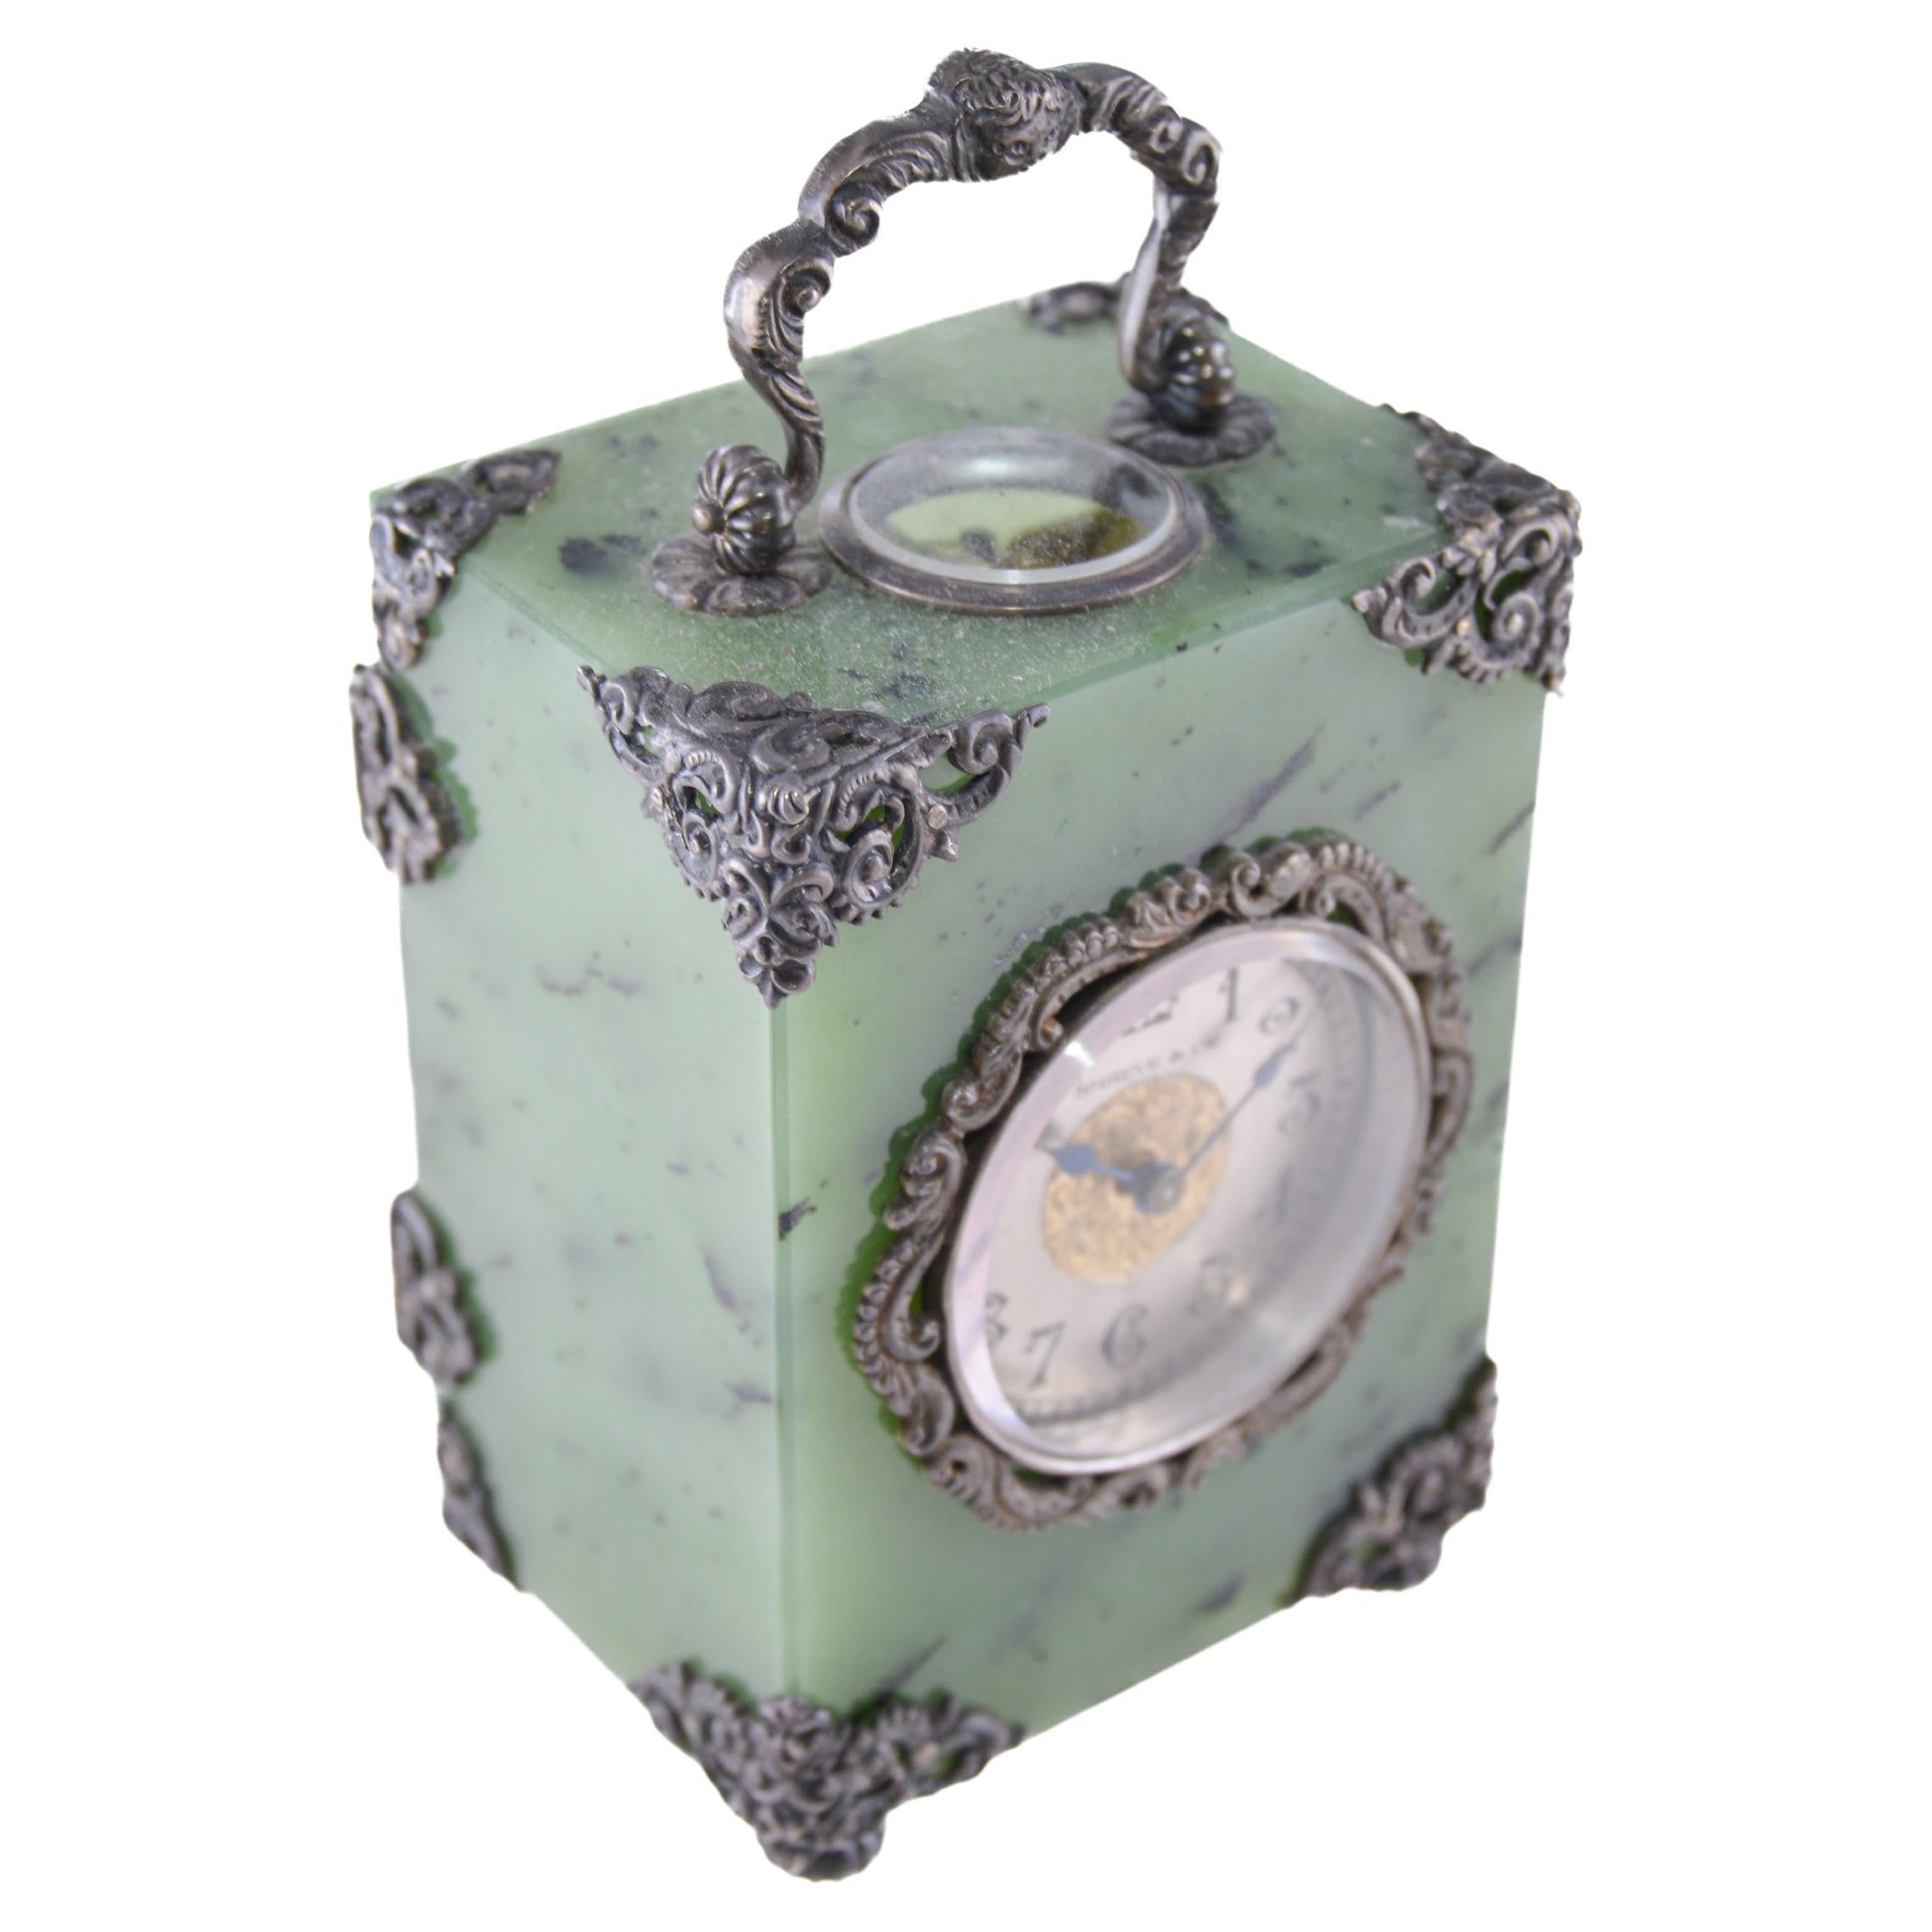 Shreve & Co Jade Carriage Clock with Exposed Escapement Sterling Hardware 1915 3